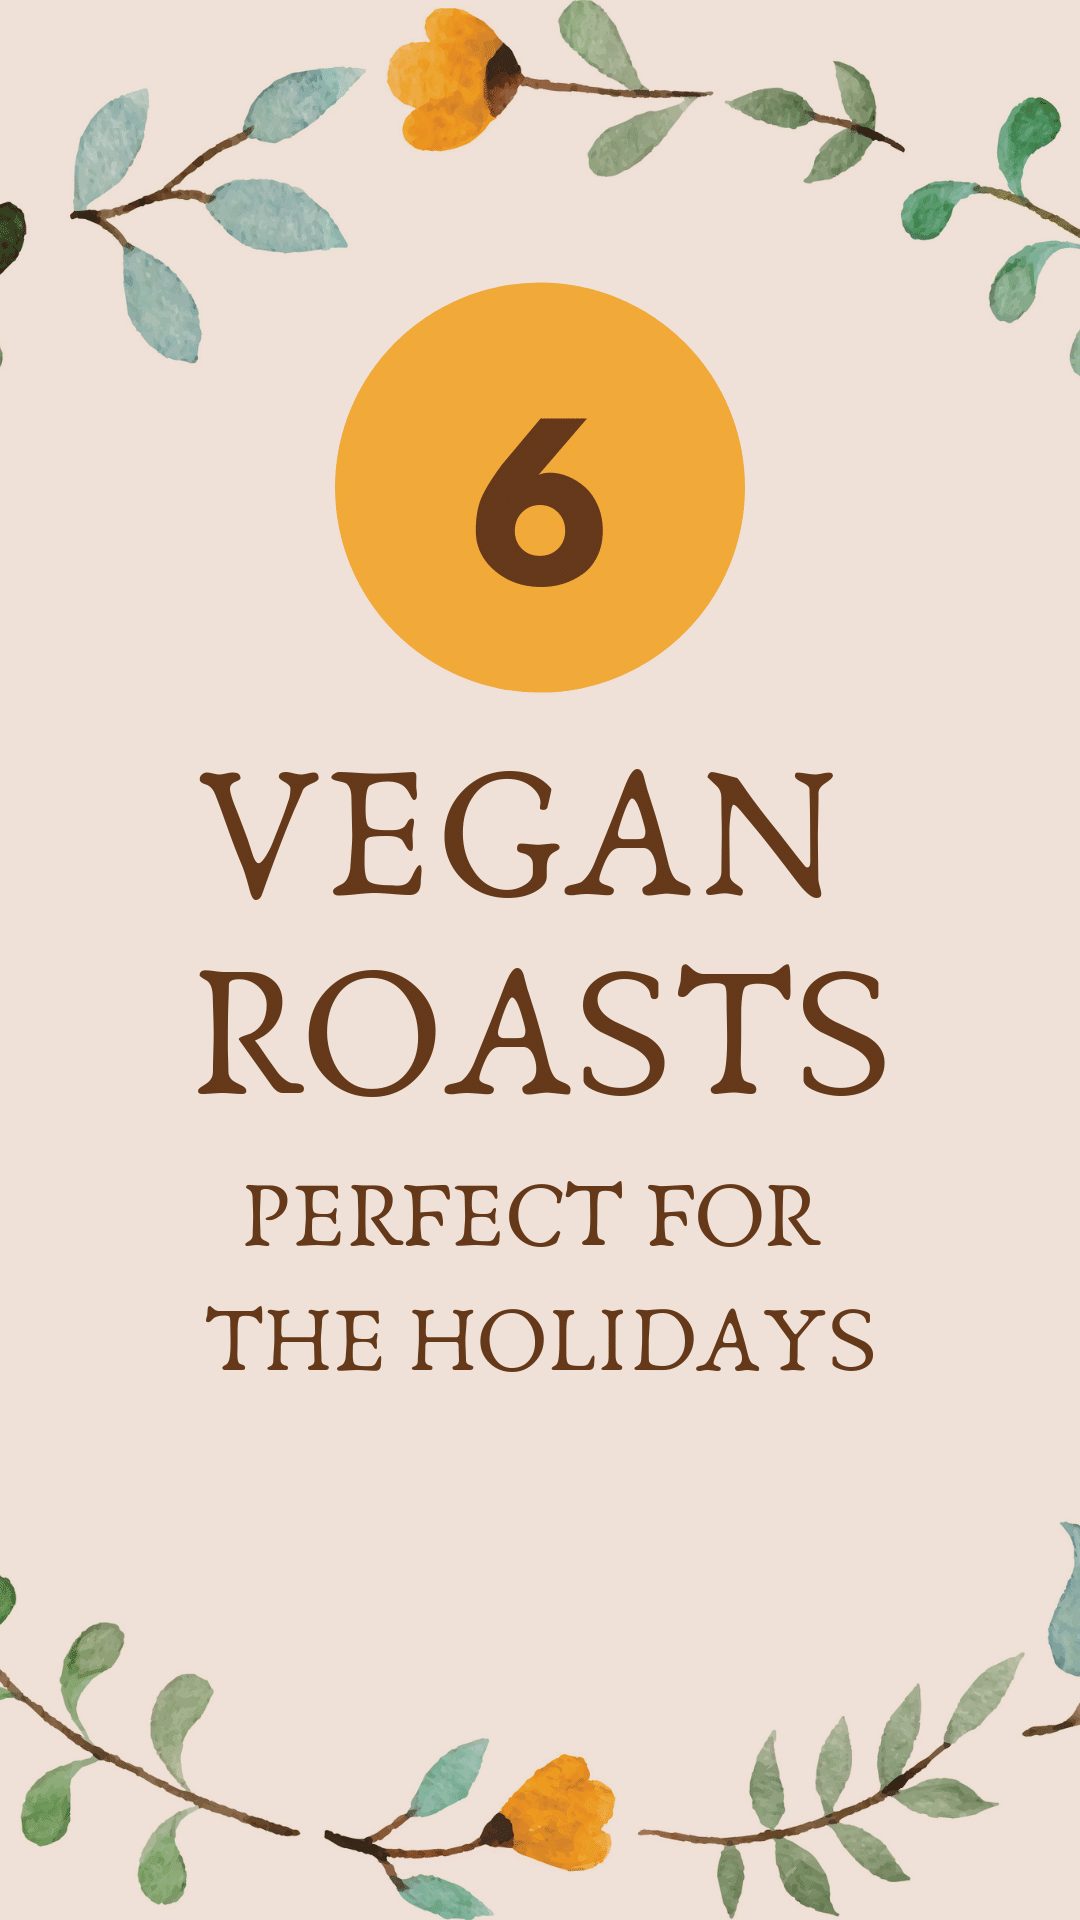 6 Vegan Roasts Perfect for the Holidays